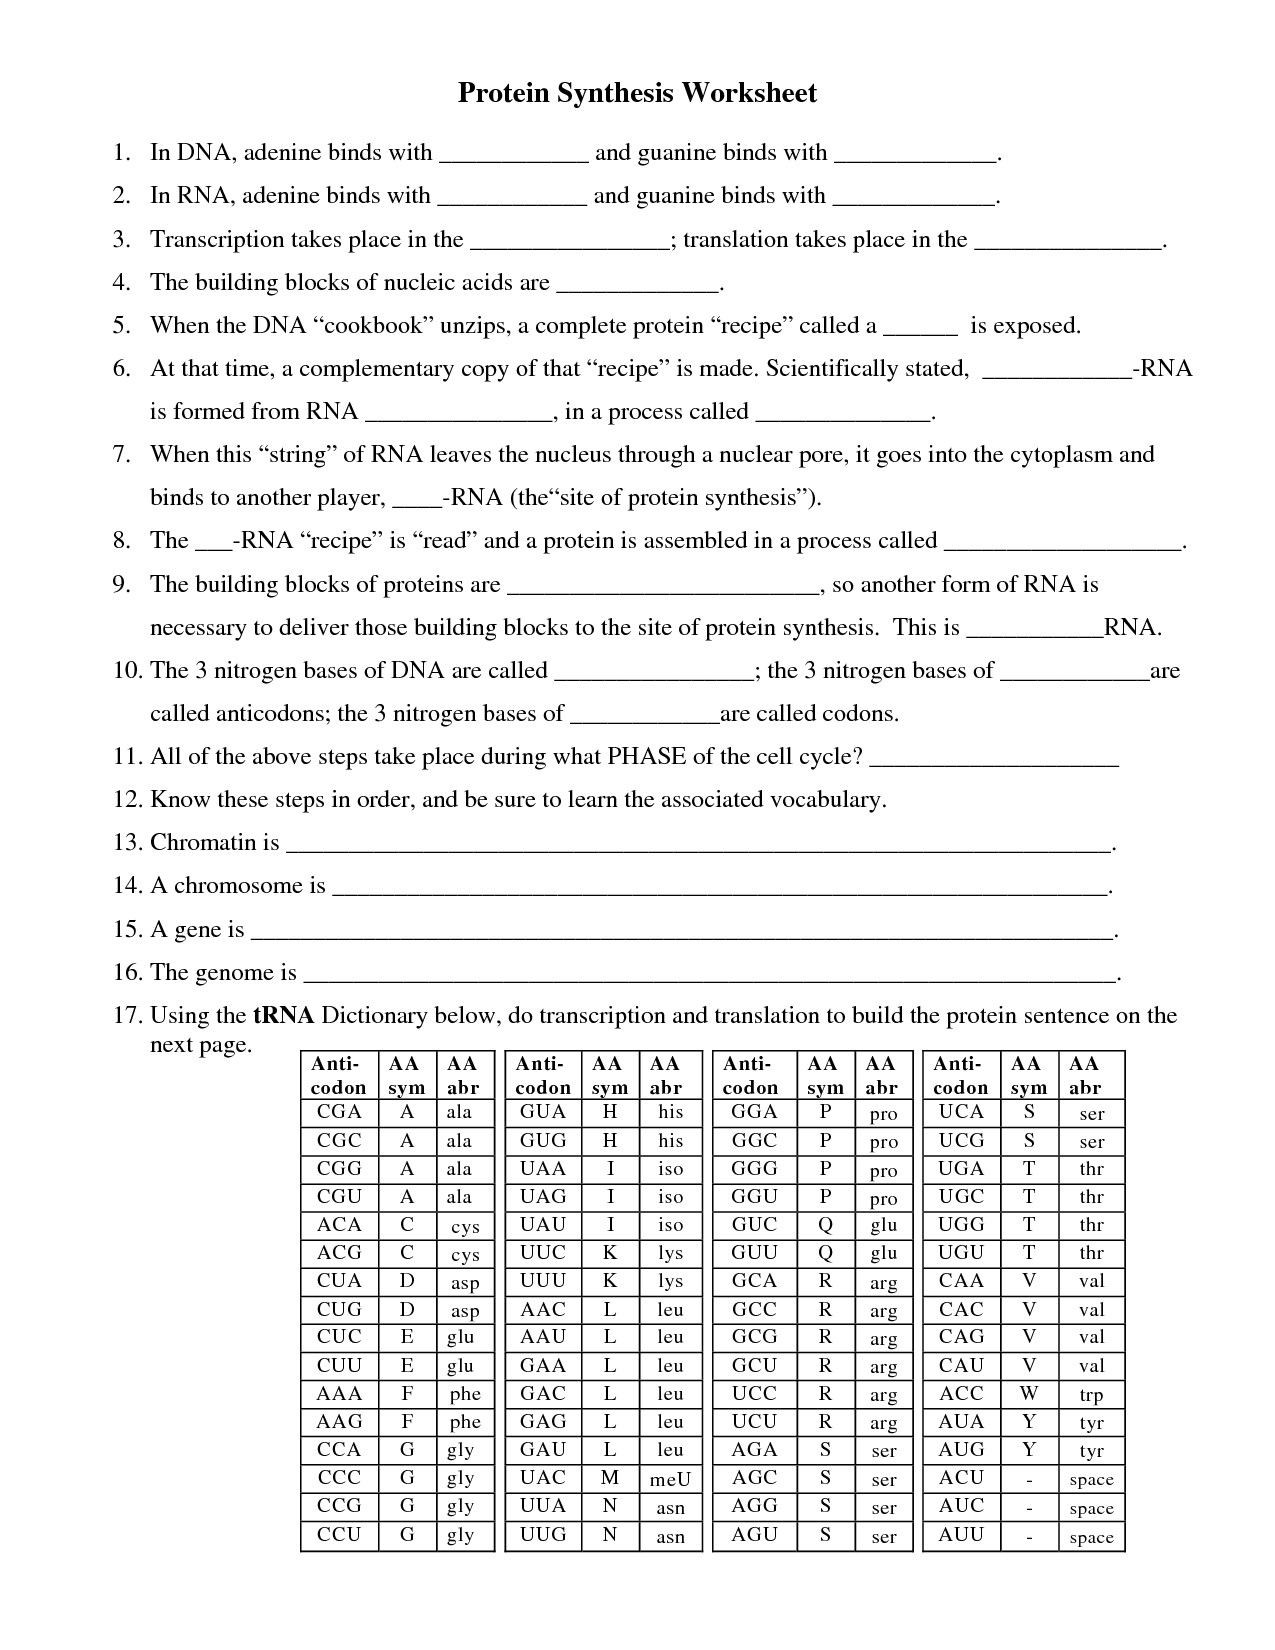 Dna Transcription and Translation Worksheet Prime Dna and Protein Synthesis Worksheet Answers